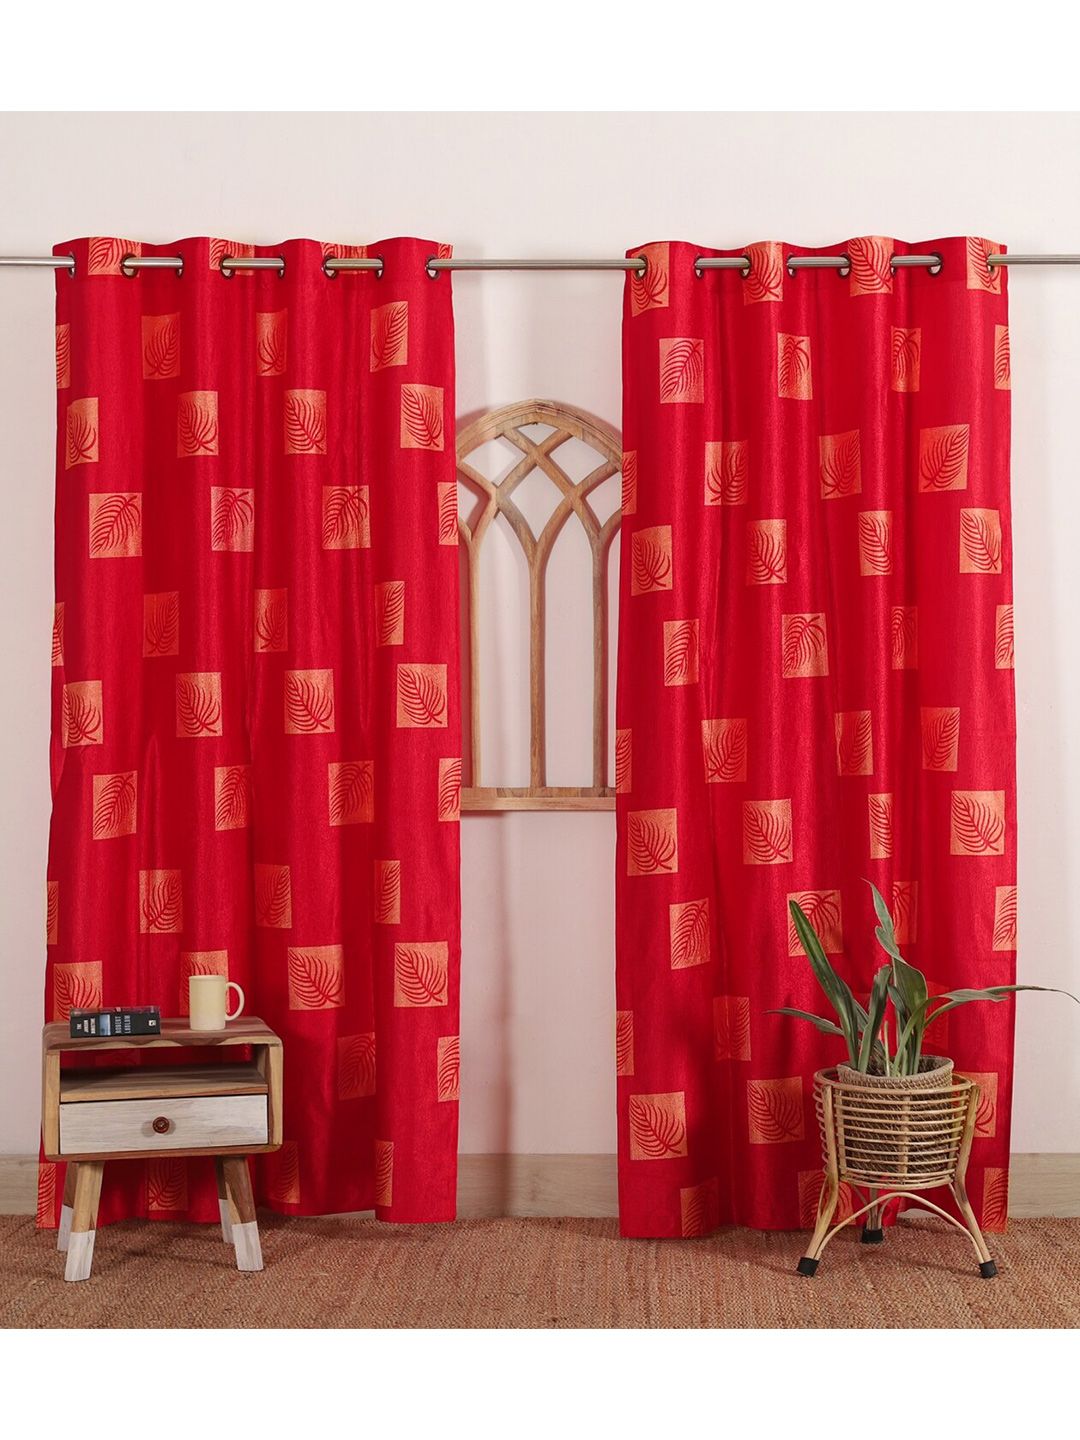 HANDICRAFT PALACE Red & Beige Set of 2 Floral Black Out Door Curtain Price in India